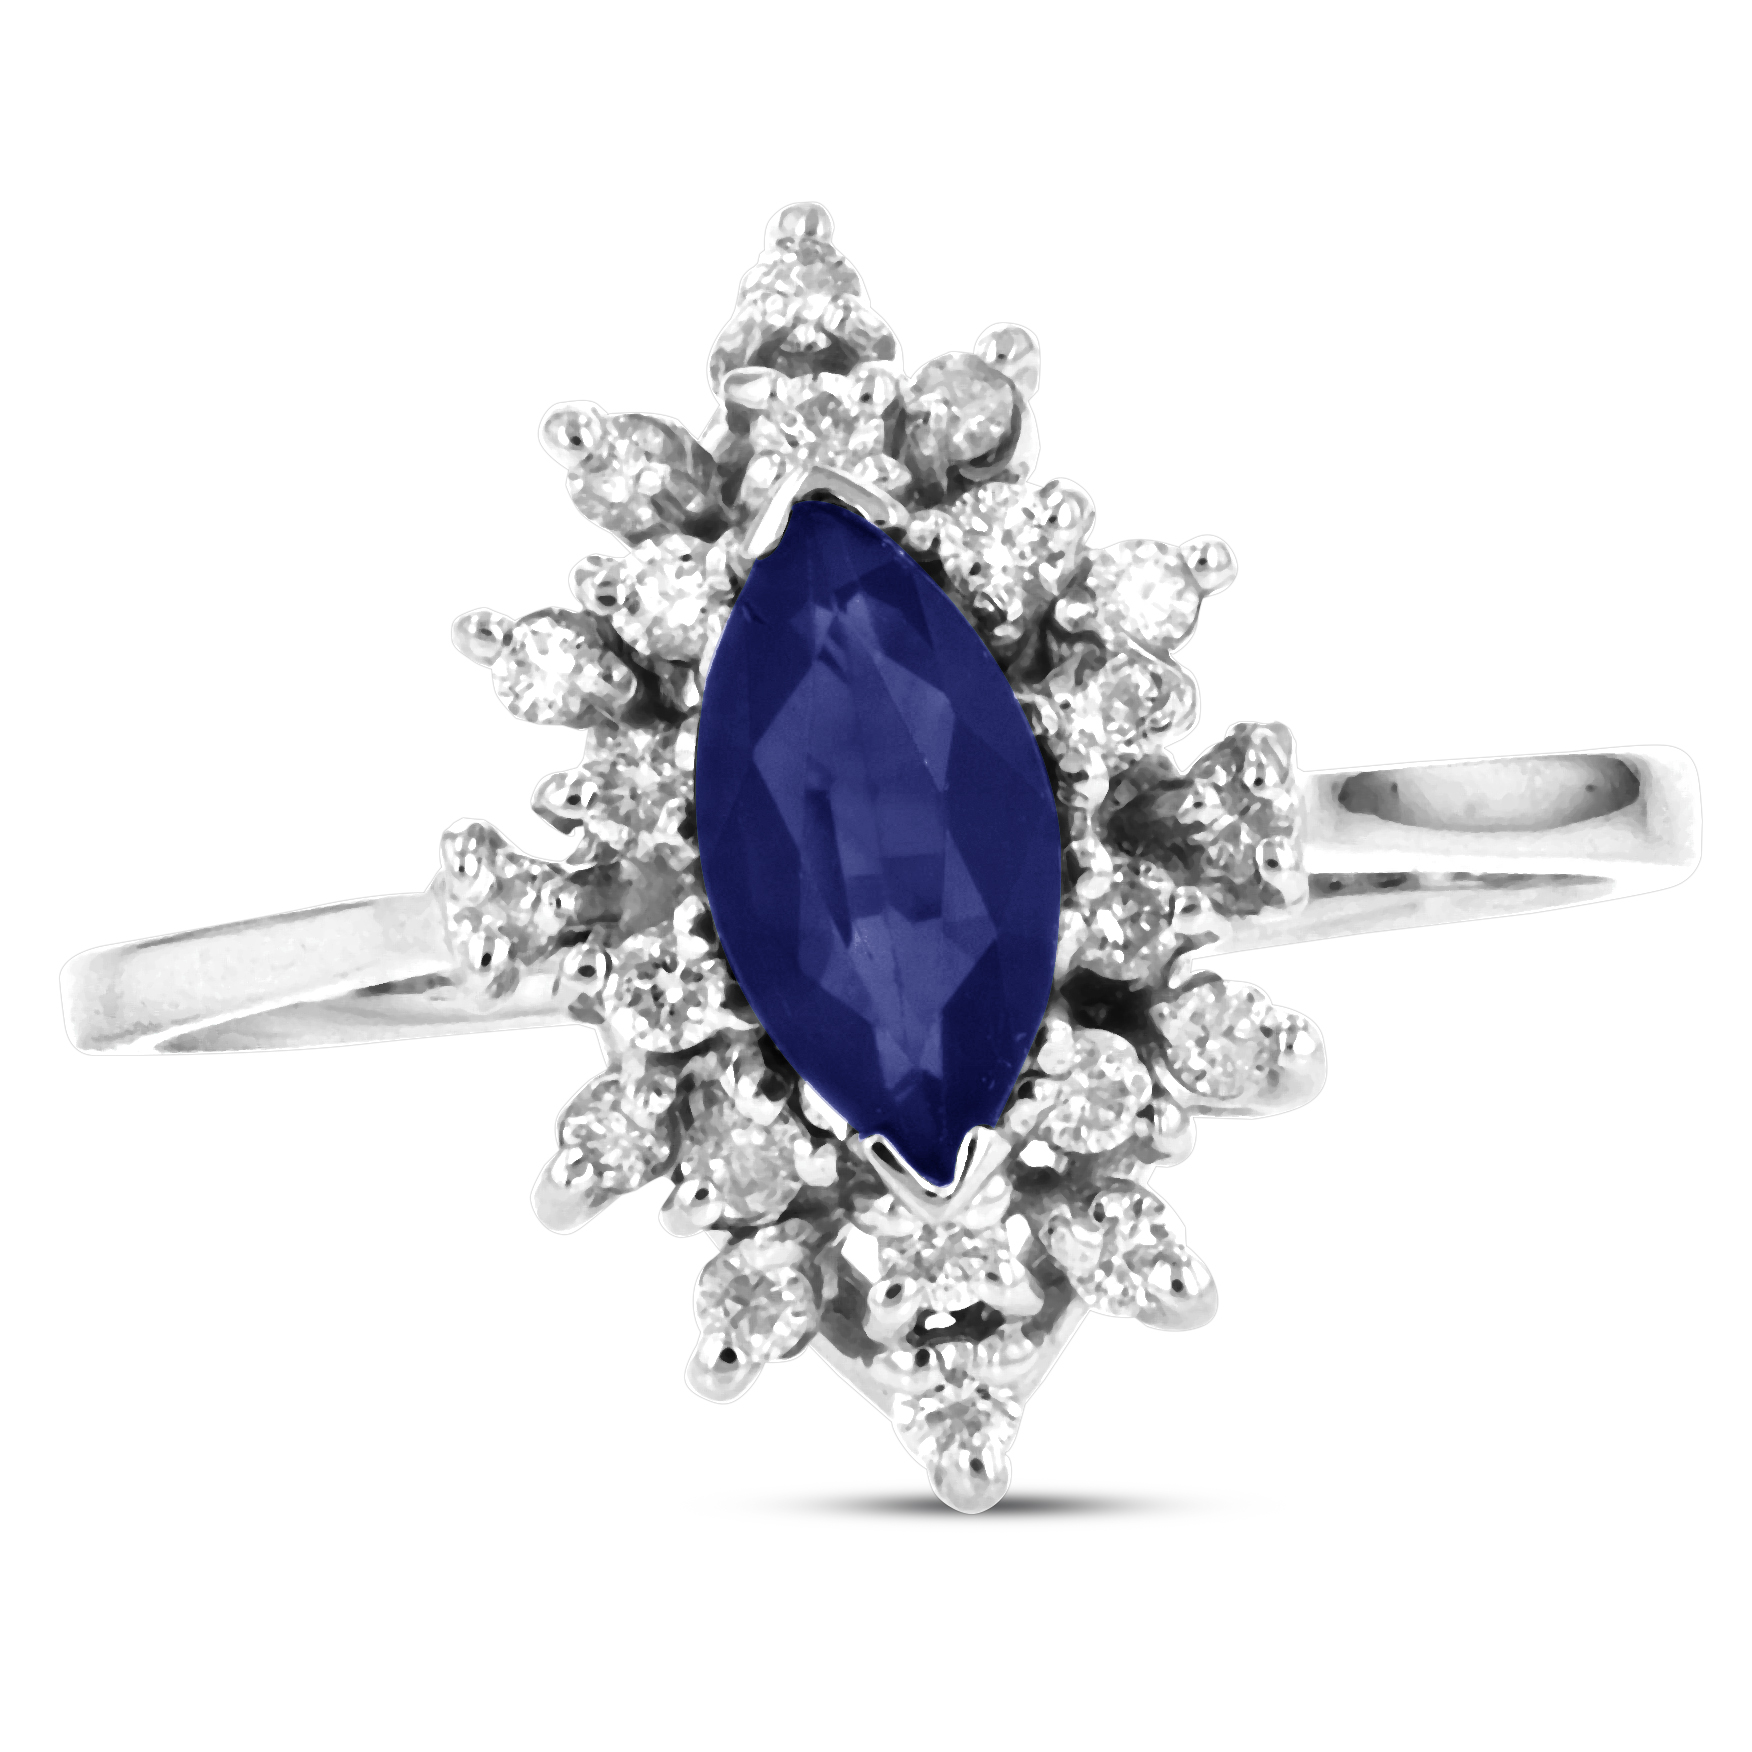 View 0.80ctw Diamond and Marquis Shaped Sapphire Ring in 14k White Gold 